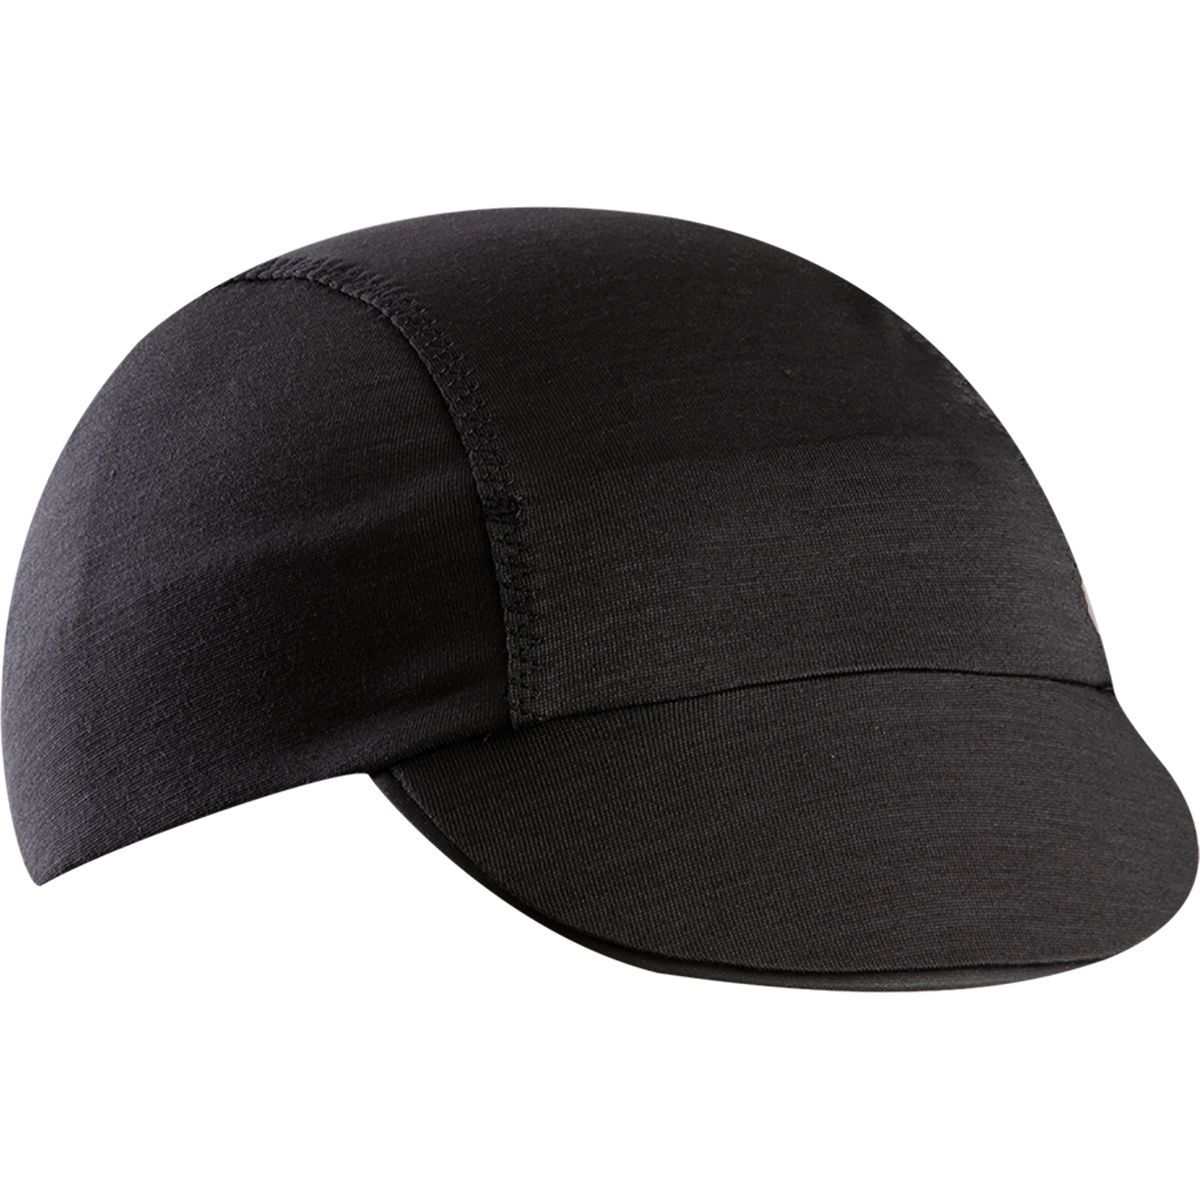 TWO CAPS Details about   2x NFTO Black Lightweight Cycling Cap Summer Weight Cycling Hat 